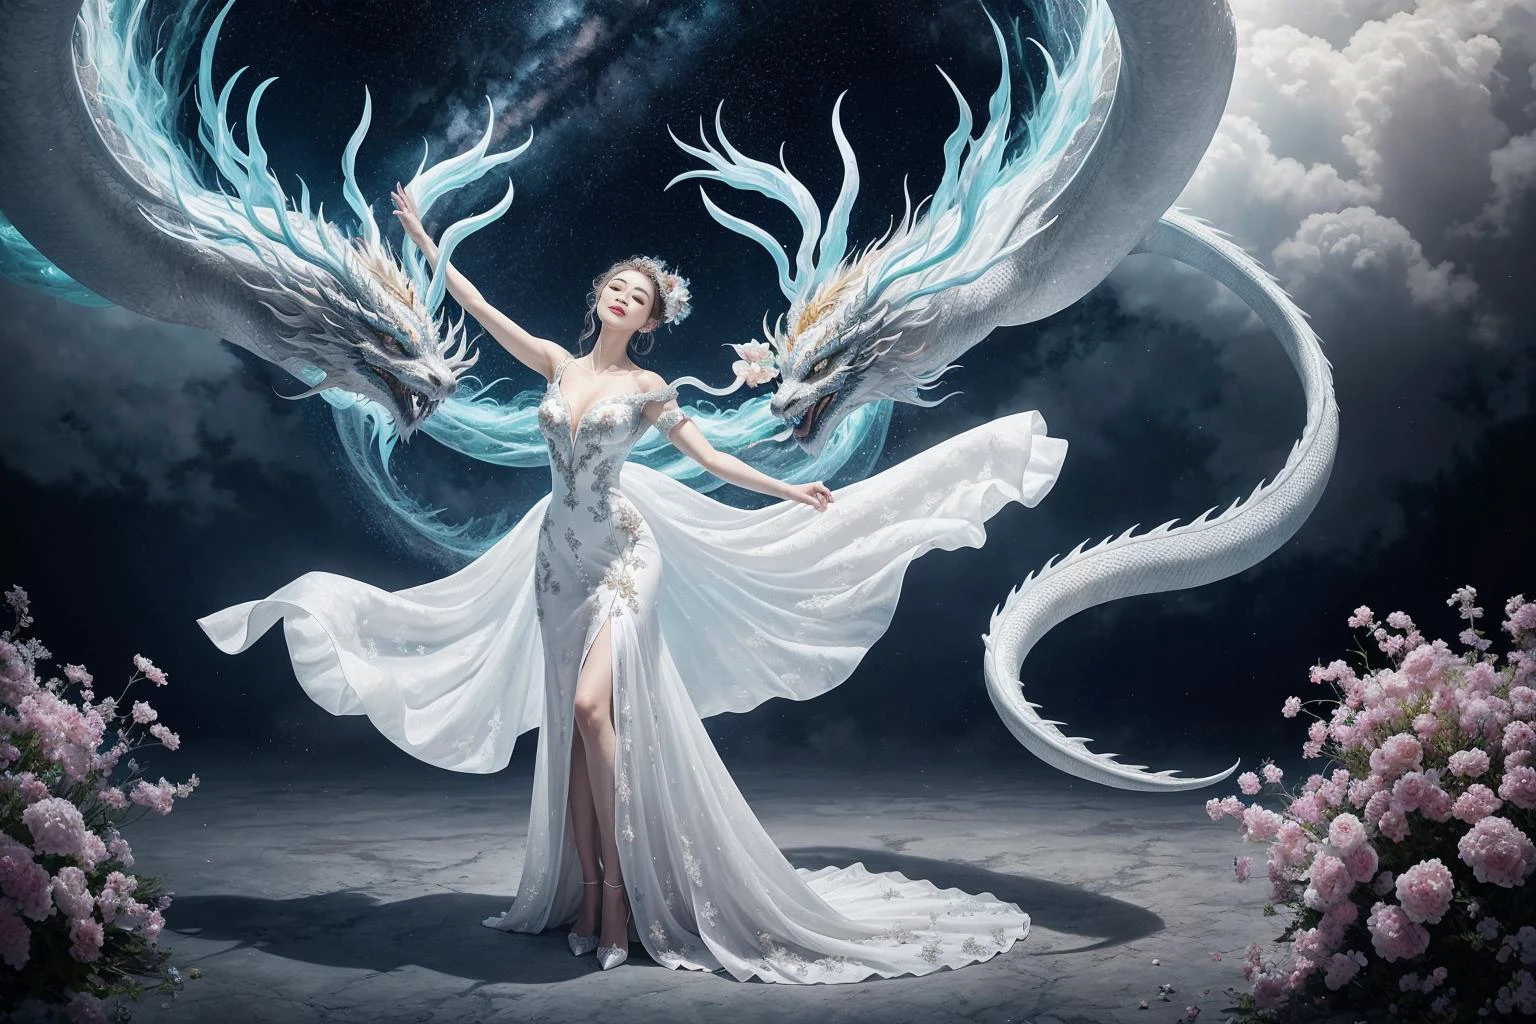 In a captivating image, an elegant woman clad in a white Chinese gown glides through the sky atop a mythical Chinese dragon. As they traverse the heavens, her flowing gown and the dragon's iridescent scales create a mesmerizing vision of harmony and otherworldly beauty.
hdr, (photorealism, masterpiece quality, best quality), pureerosface_v1,ulzzang-6500-v1.1